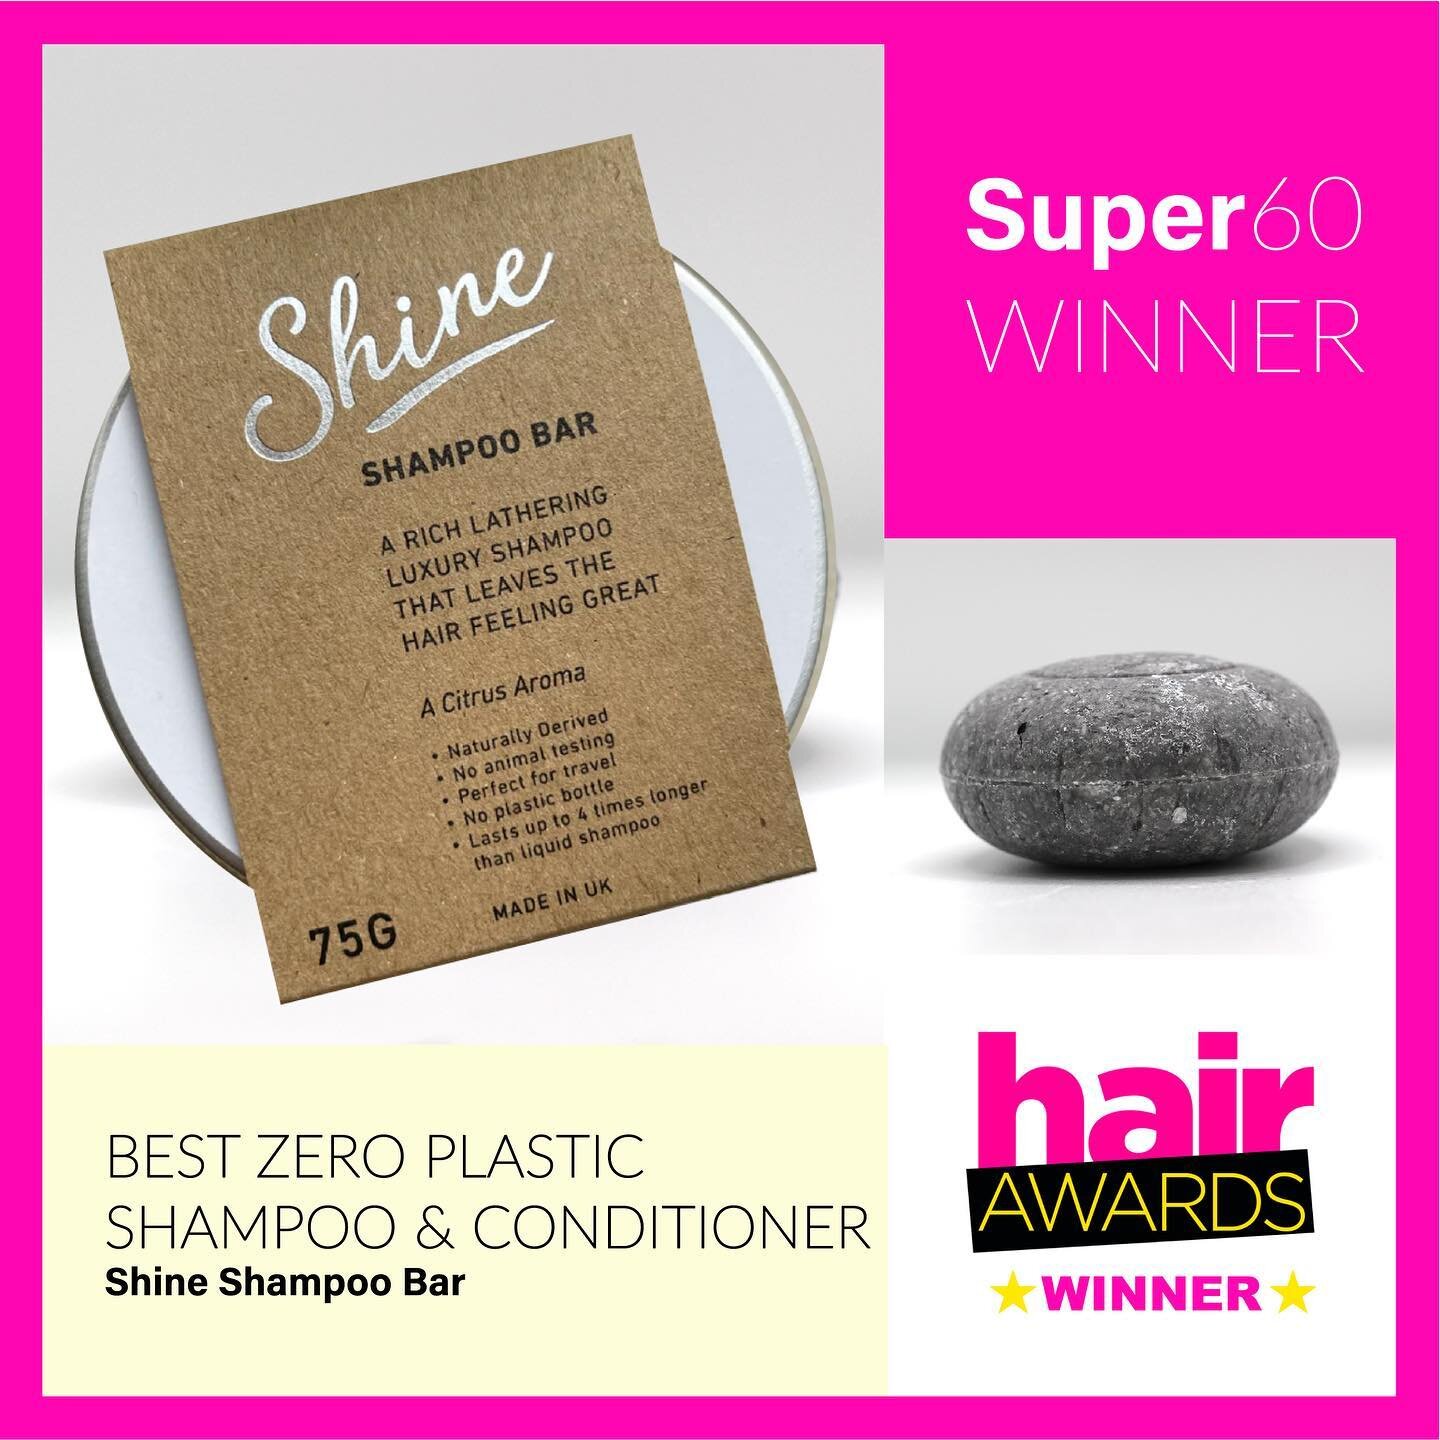 Saturday shoutout to @hairmagazine &amp; @beauty_worksonline for one our most favourite awards to date 🏆

🌱 Best Zero Plastic Shampoo at The Hair Awards a few years back 🫶🏽 will always be very proud to be included in The Super 60! 🫧
.